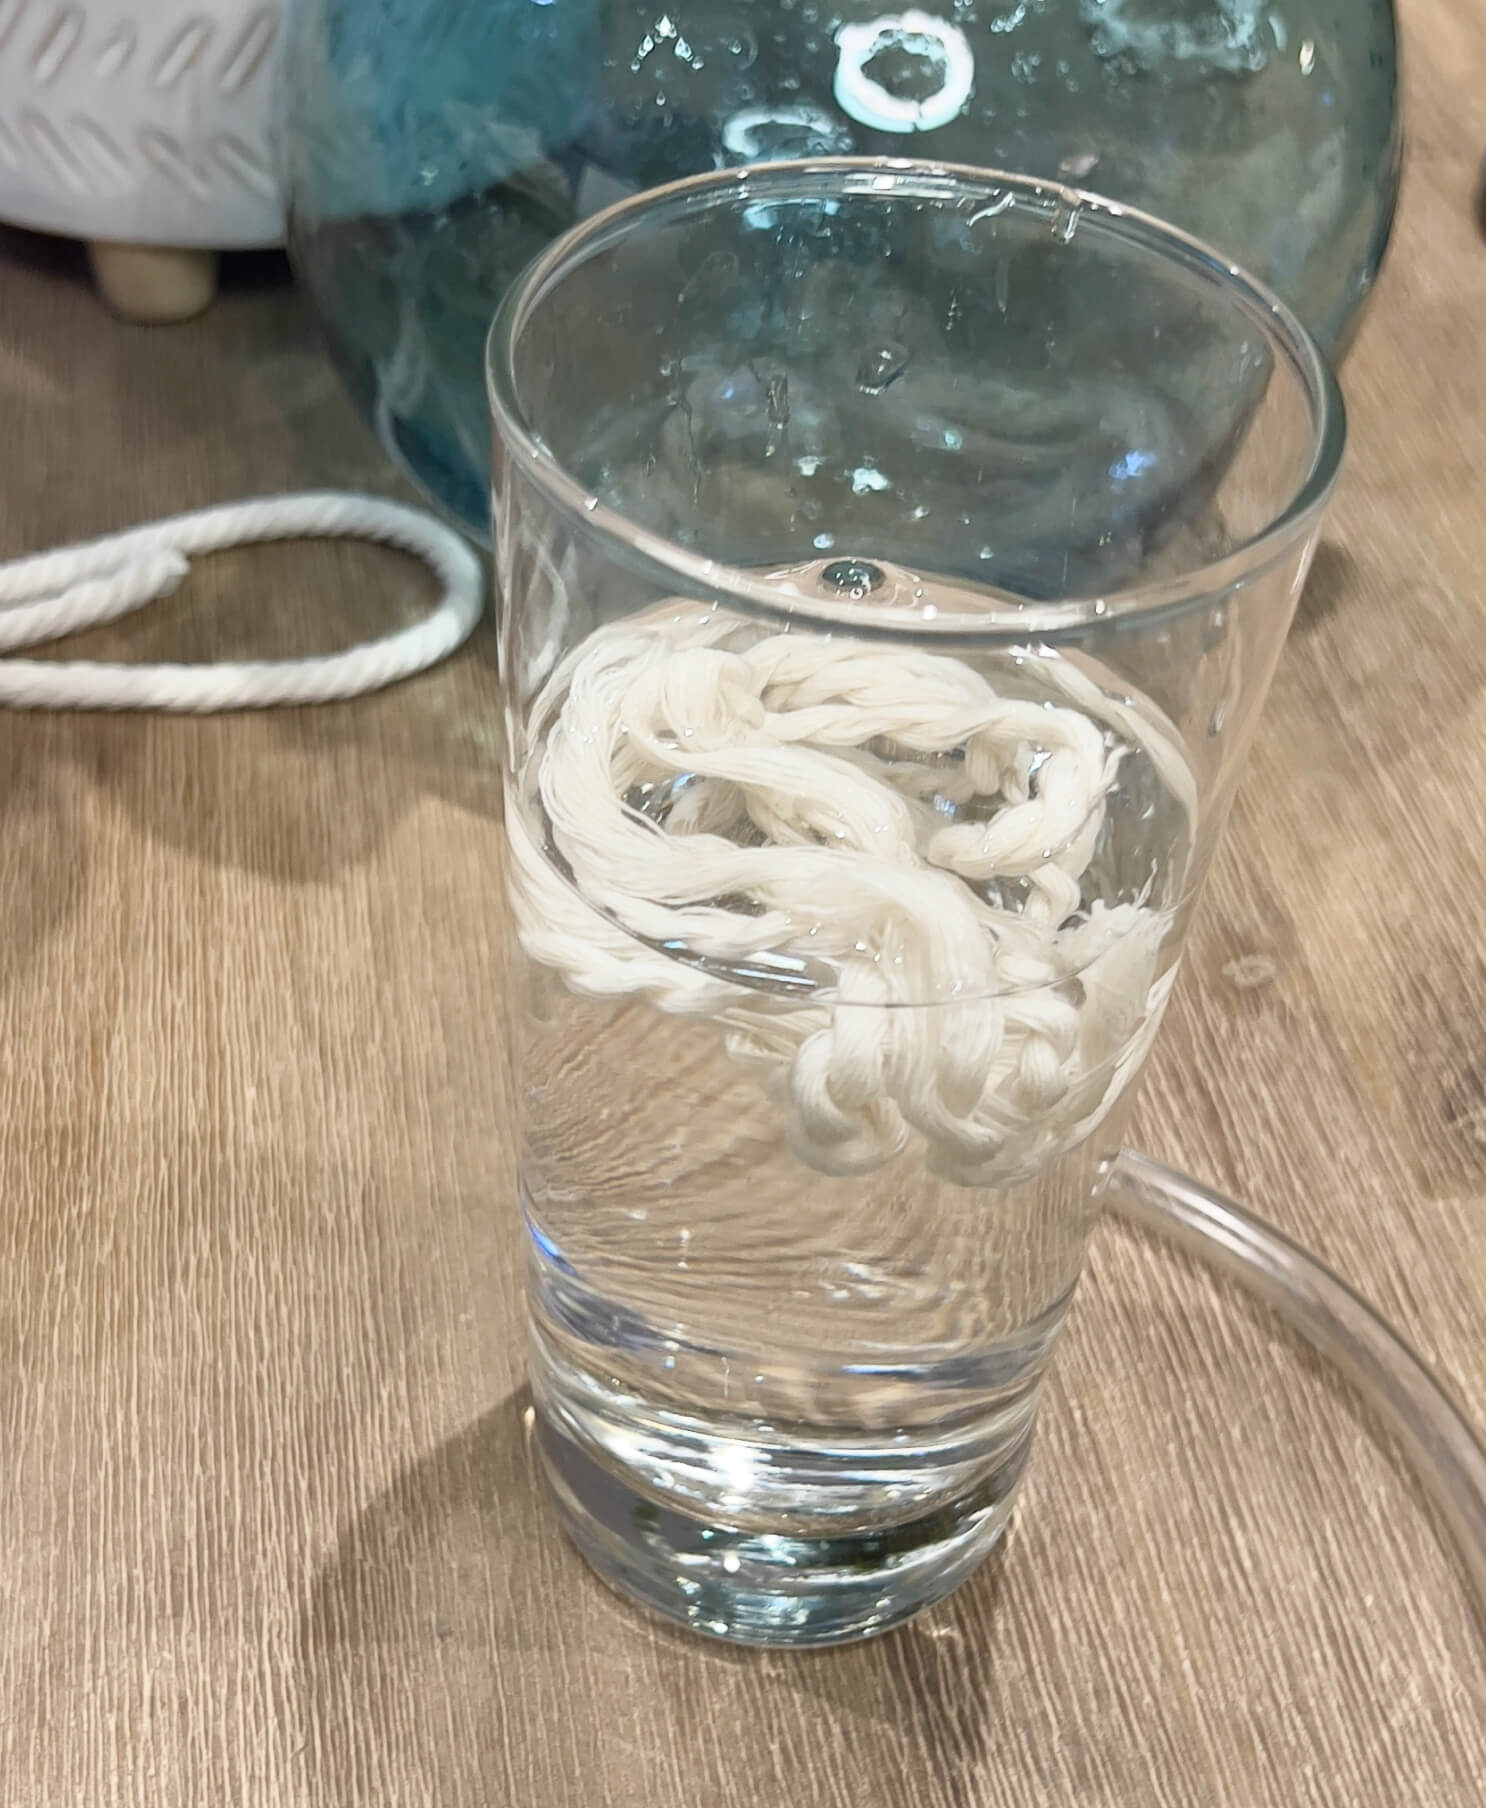 wet your cotton cord in water